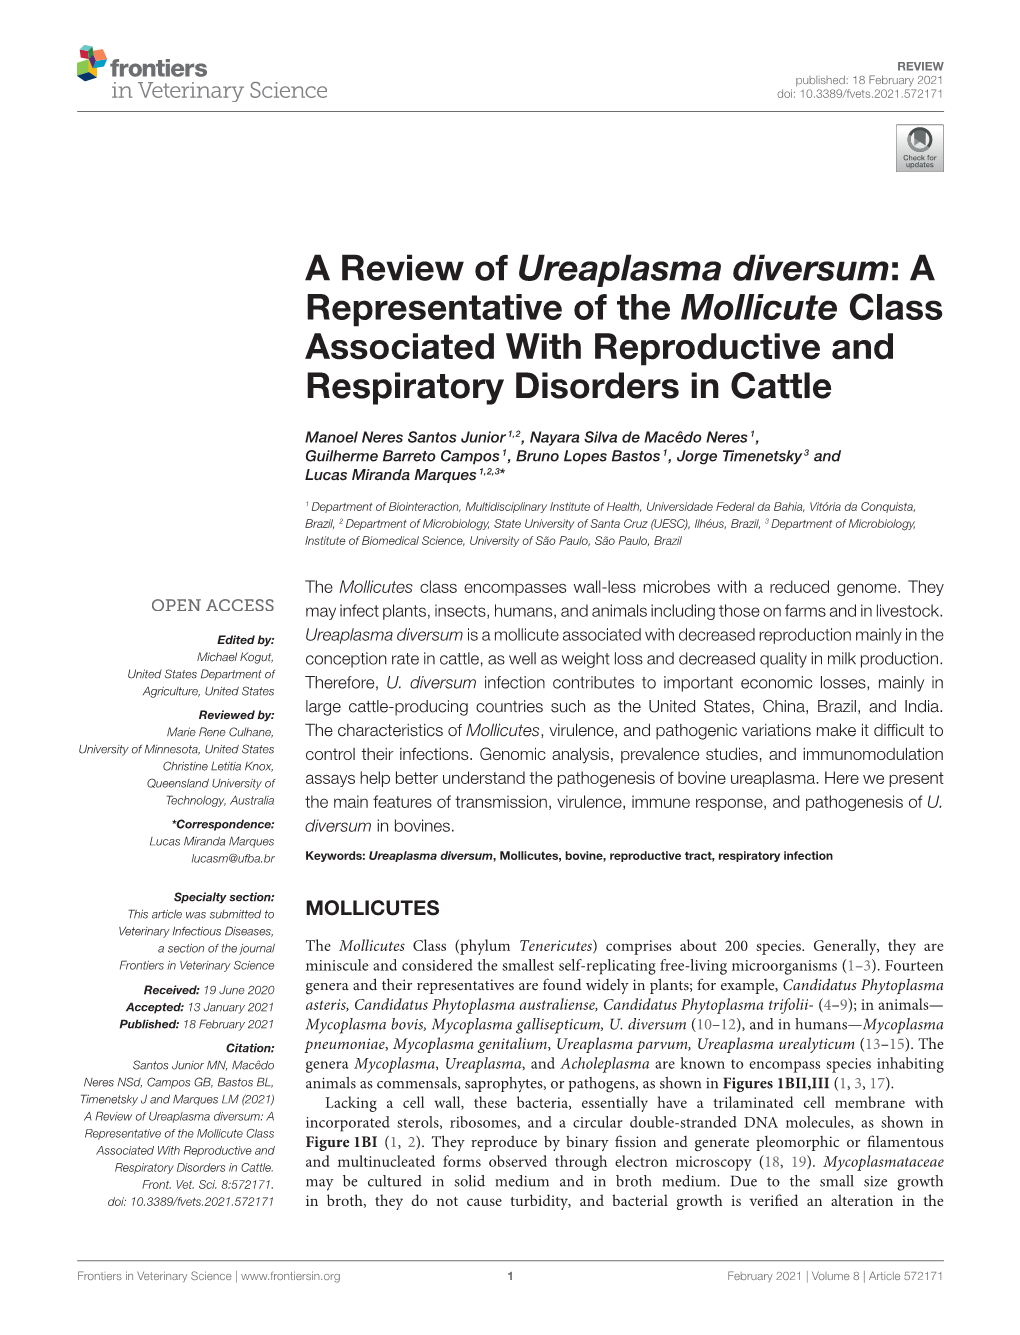 A Review of Ureaplasma Diversum: a Representative of the Mollicute Class Associated with Reproductive and Respiratory Disorders in Cattle